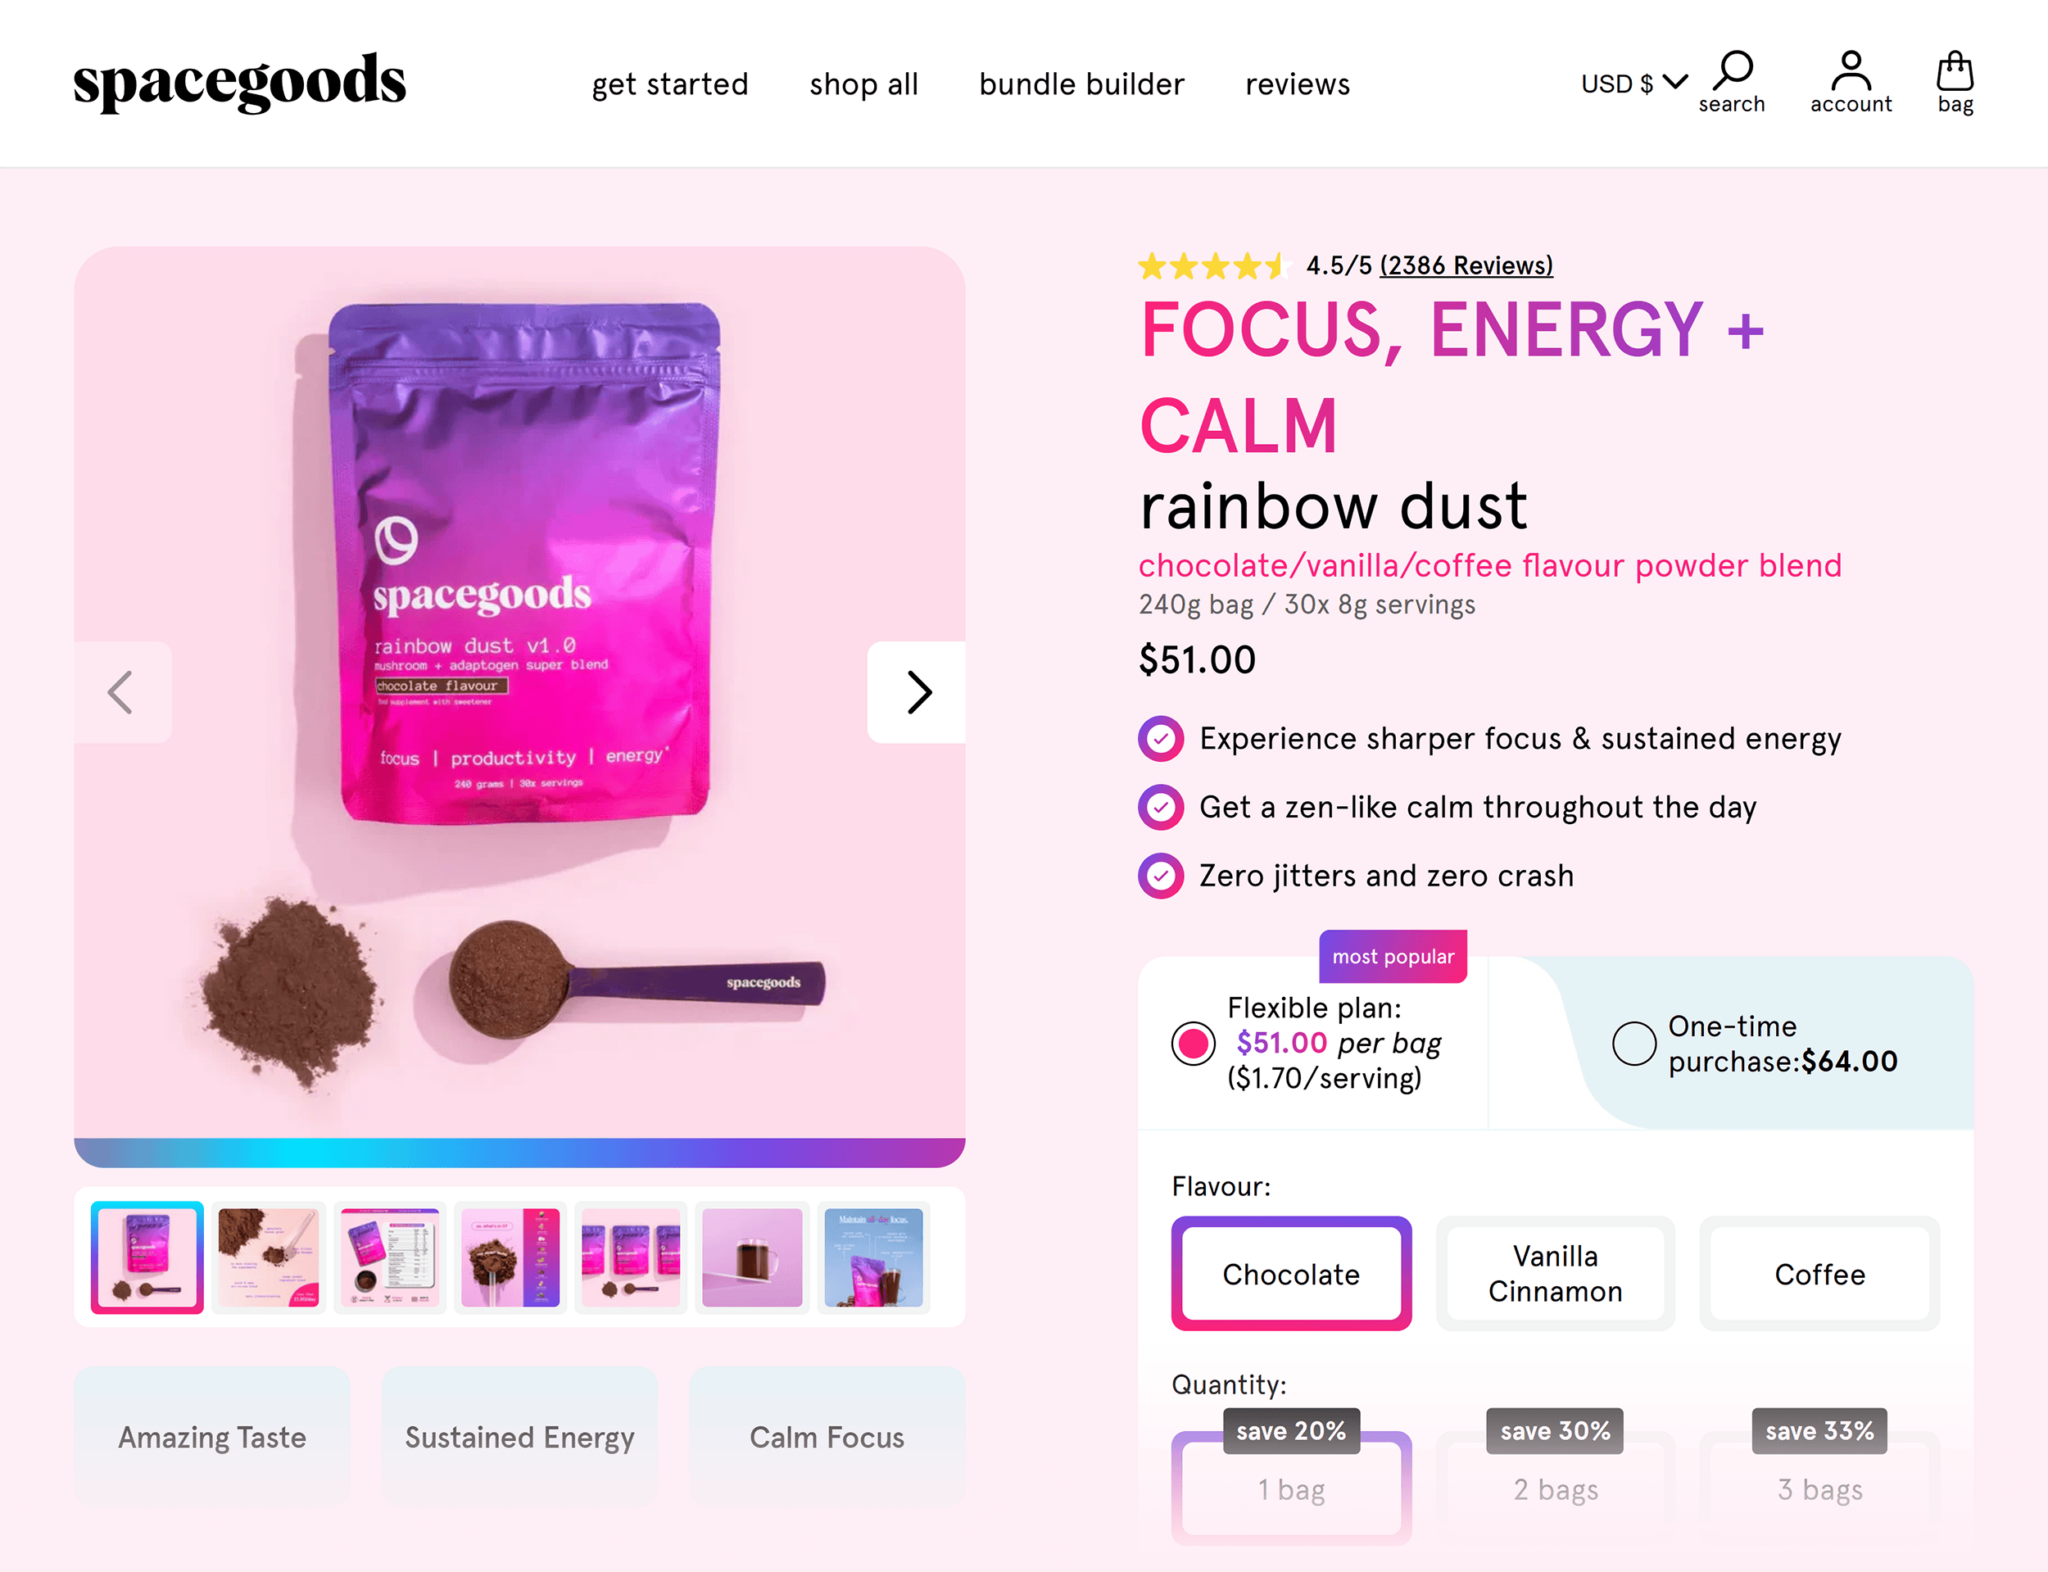 spacegoods-rainbow-dust 20 Effective Product Page Examples (+ Best Practices)